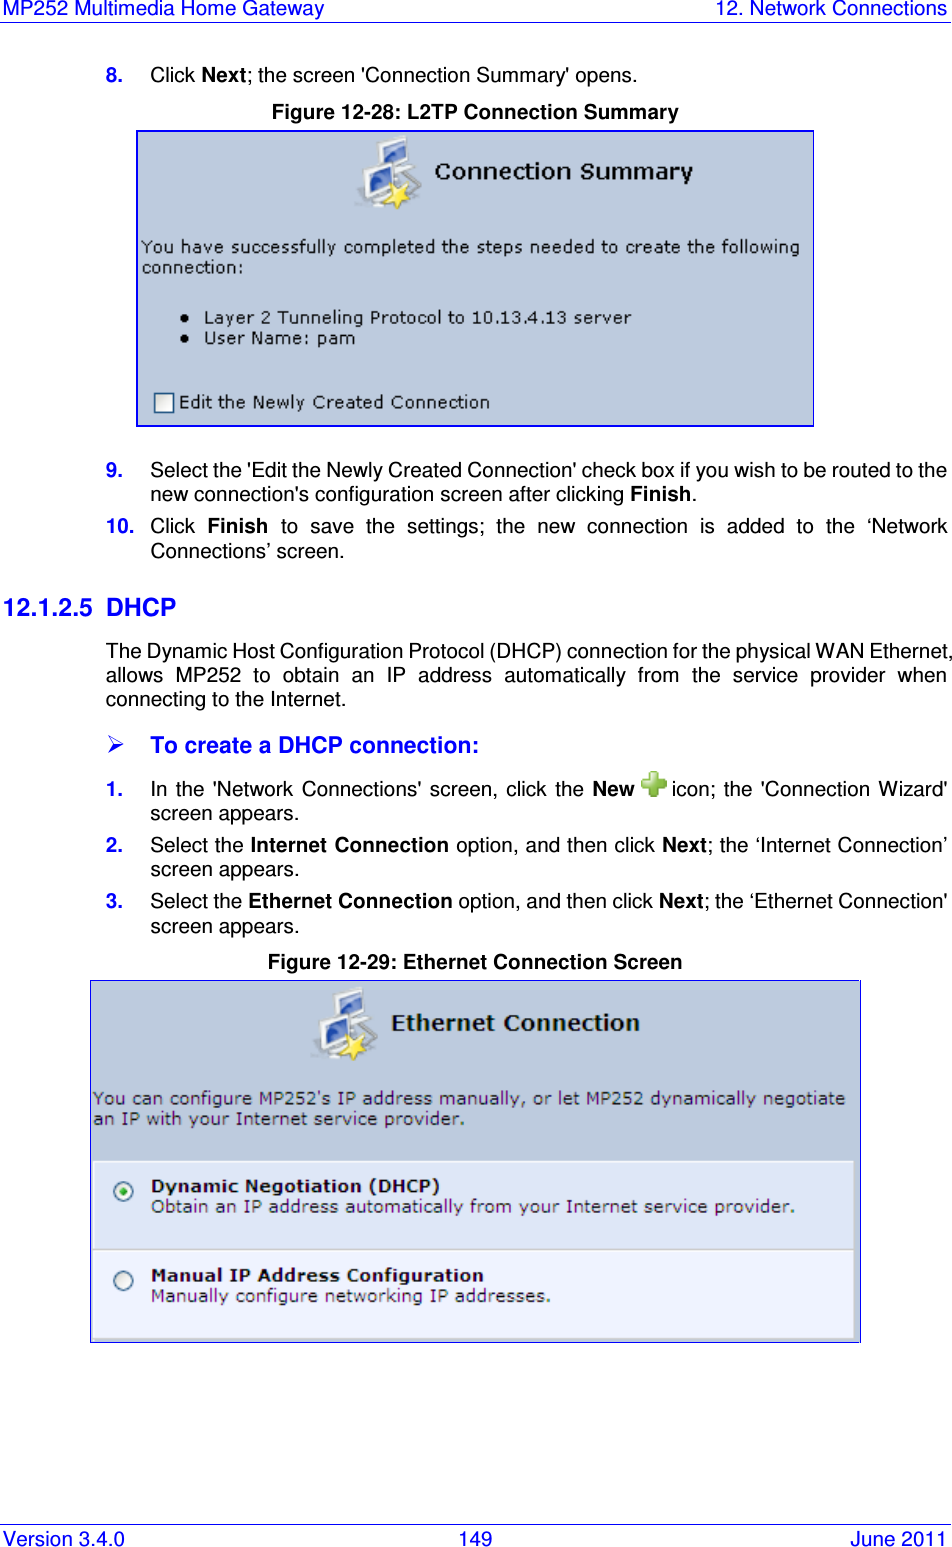 MP252 Multimedia Home Gateway  12. Network Connections Version 3.4.0  149  June 2011 8.  Click Next; the screen &apos;Connection Summary&apos; opens. Figure 12-28: L2TP Connection Summary  9.  Select the &apos;Edit the Newly Created Connection&apos; check box if you wish to be routed to the new connection&apos;s configuration screen after clicking Finish. 10.  Click  Finish  to  save  the  settings;  the  new  connection  is  added  to  the  ‘Network Connections’ screen. 12.1.2.5  DHCP The Dynamic Host Configuration Protocol (DHCP) connection for the physical WAN Ethernet, allows  MP252  to  obtain  an  IP  address  automatically  from  the  service  provider  when connecting to the Internet.  To create a DHCP connection: 1.  In the &apos;Network Connections&apos;  screen,  click the New   icon;  the  &apos;Connection Wizard&apos; screen appears. 2.  Select the Internet Connection option, and then click Next; the ‘Internet Connection’ screen appears. 3.  Select the Ethernet Connection option, and then click Next; the ‘Ethernet Connection&apos; screen appears. Figure 12-29: Ethernet Connection Screen  